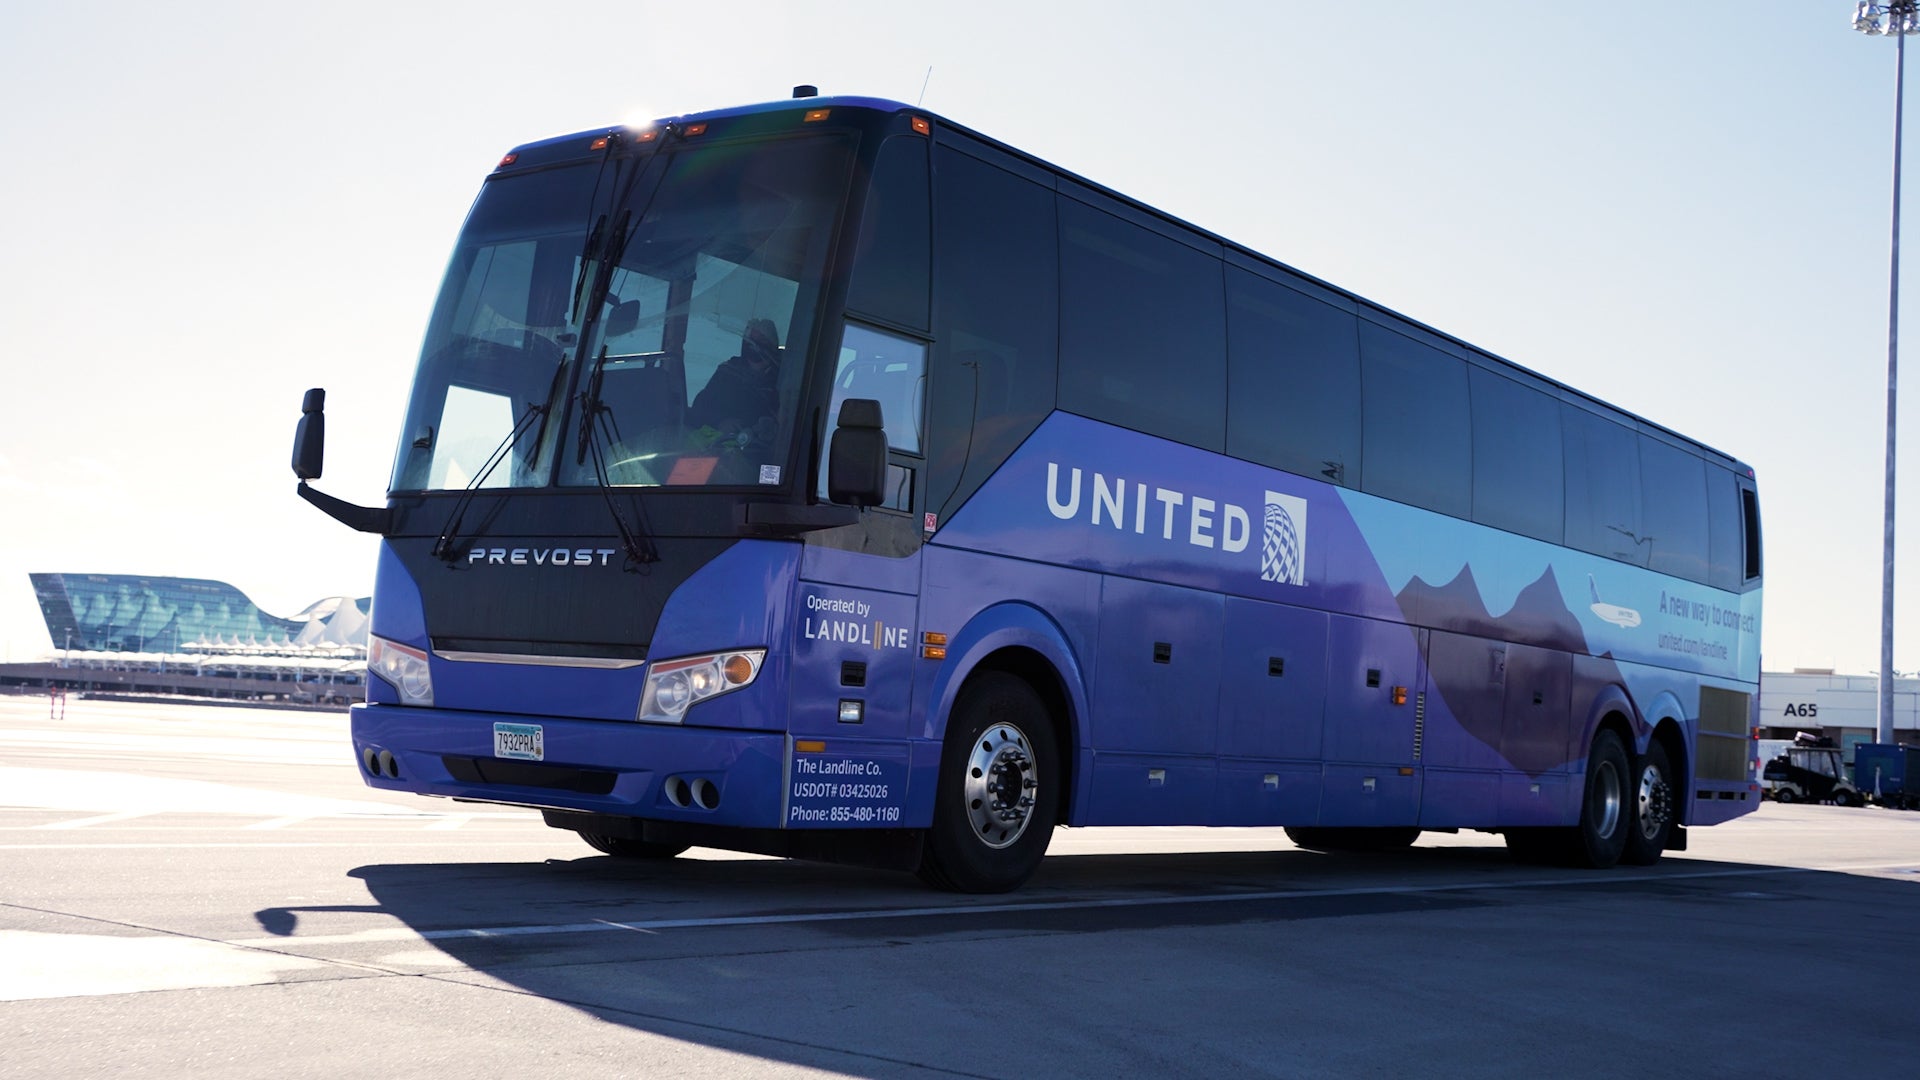 United adds one-stop bus service to 2 Colorado destinations - The Points Guy